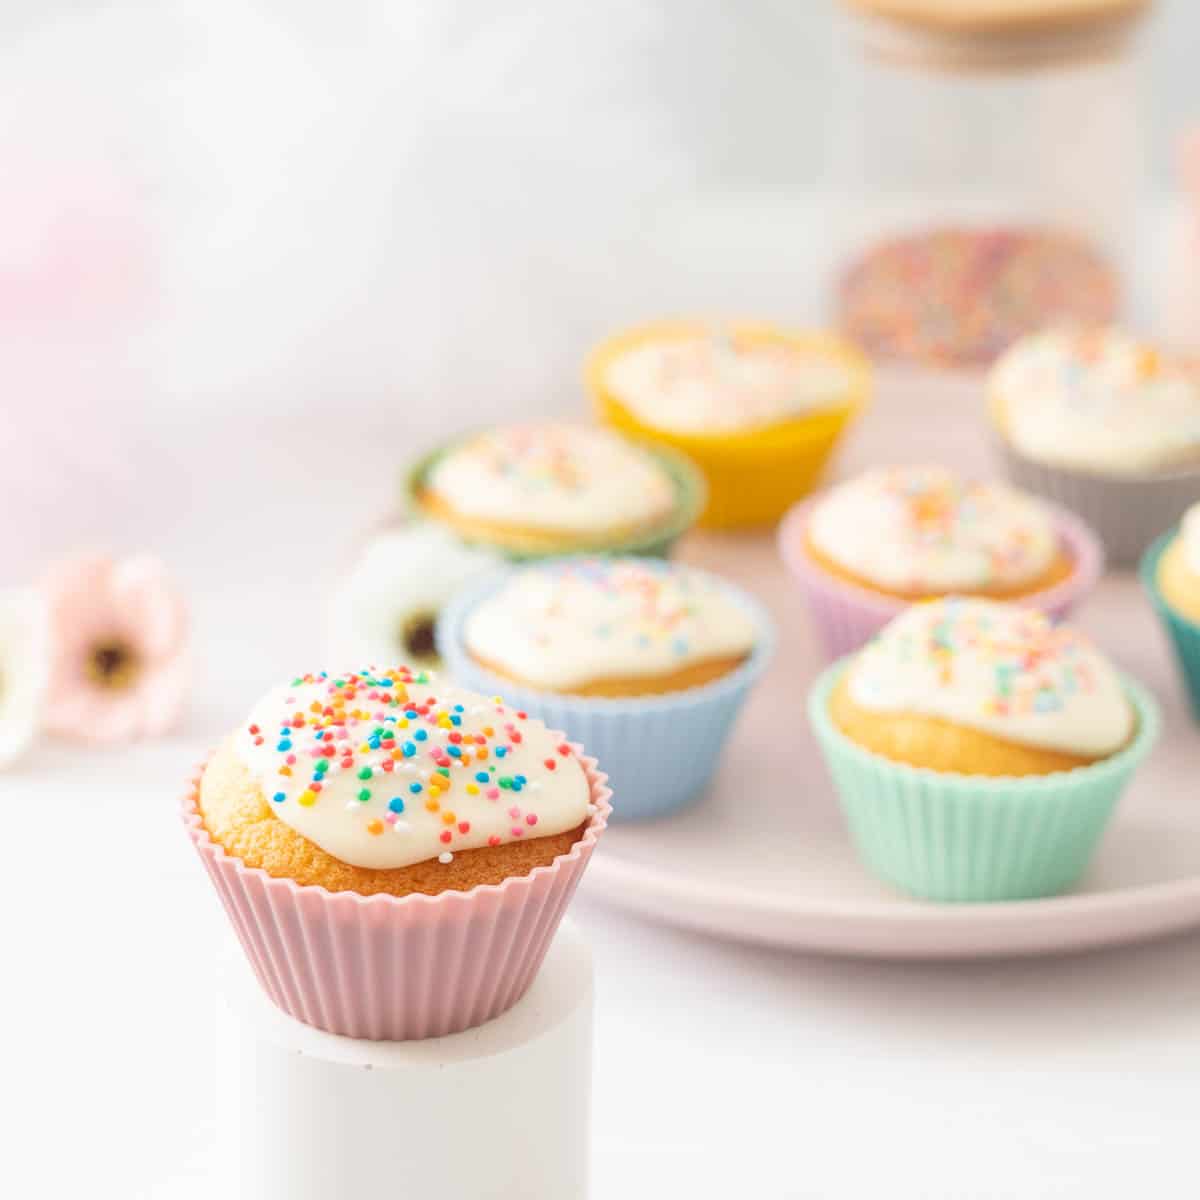 Vanilla cupcakes decorated with rainbow sprinkles displayed on white and pink plates.